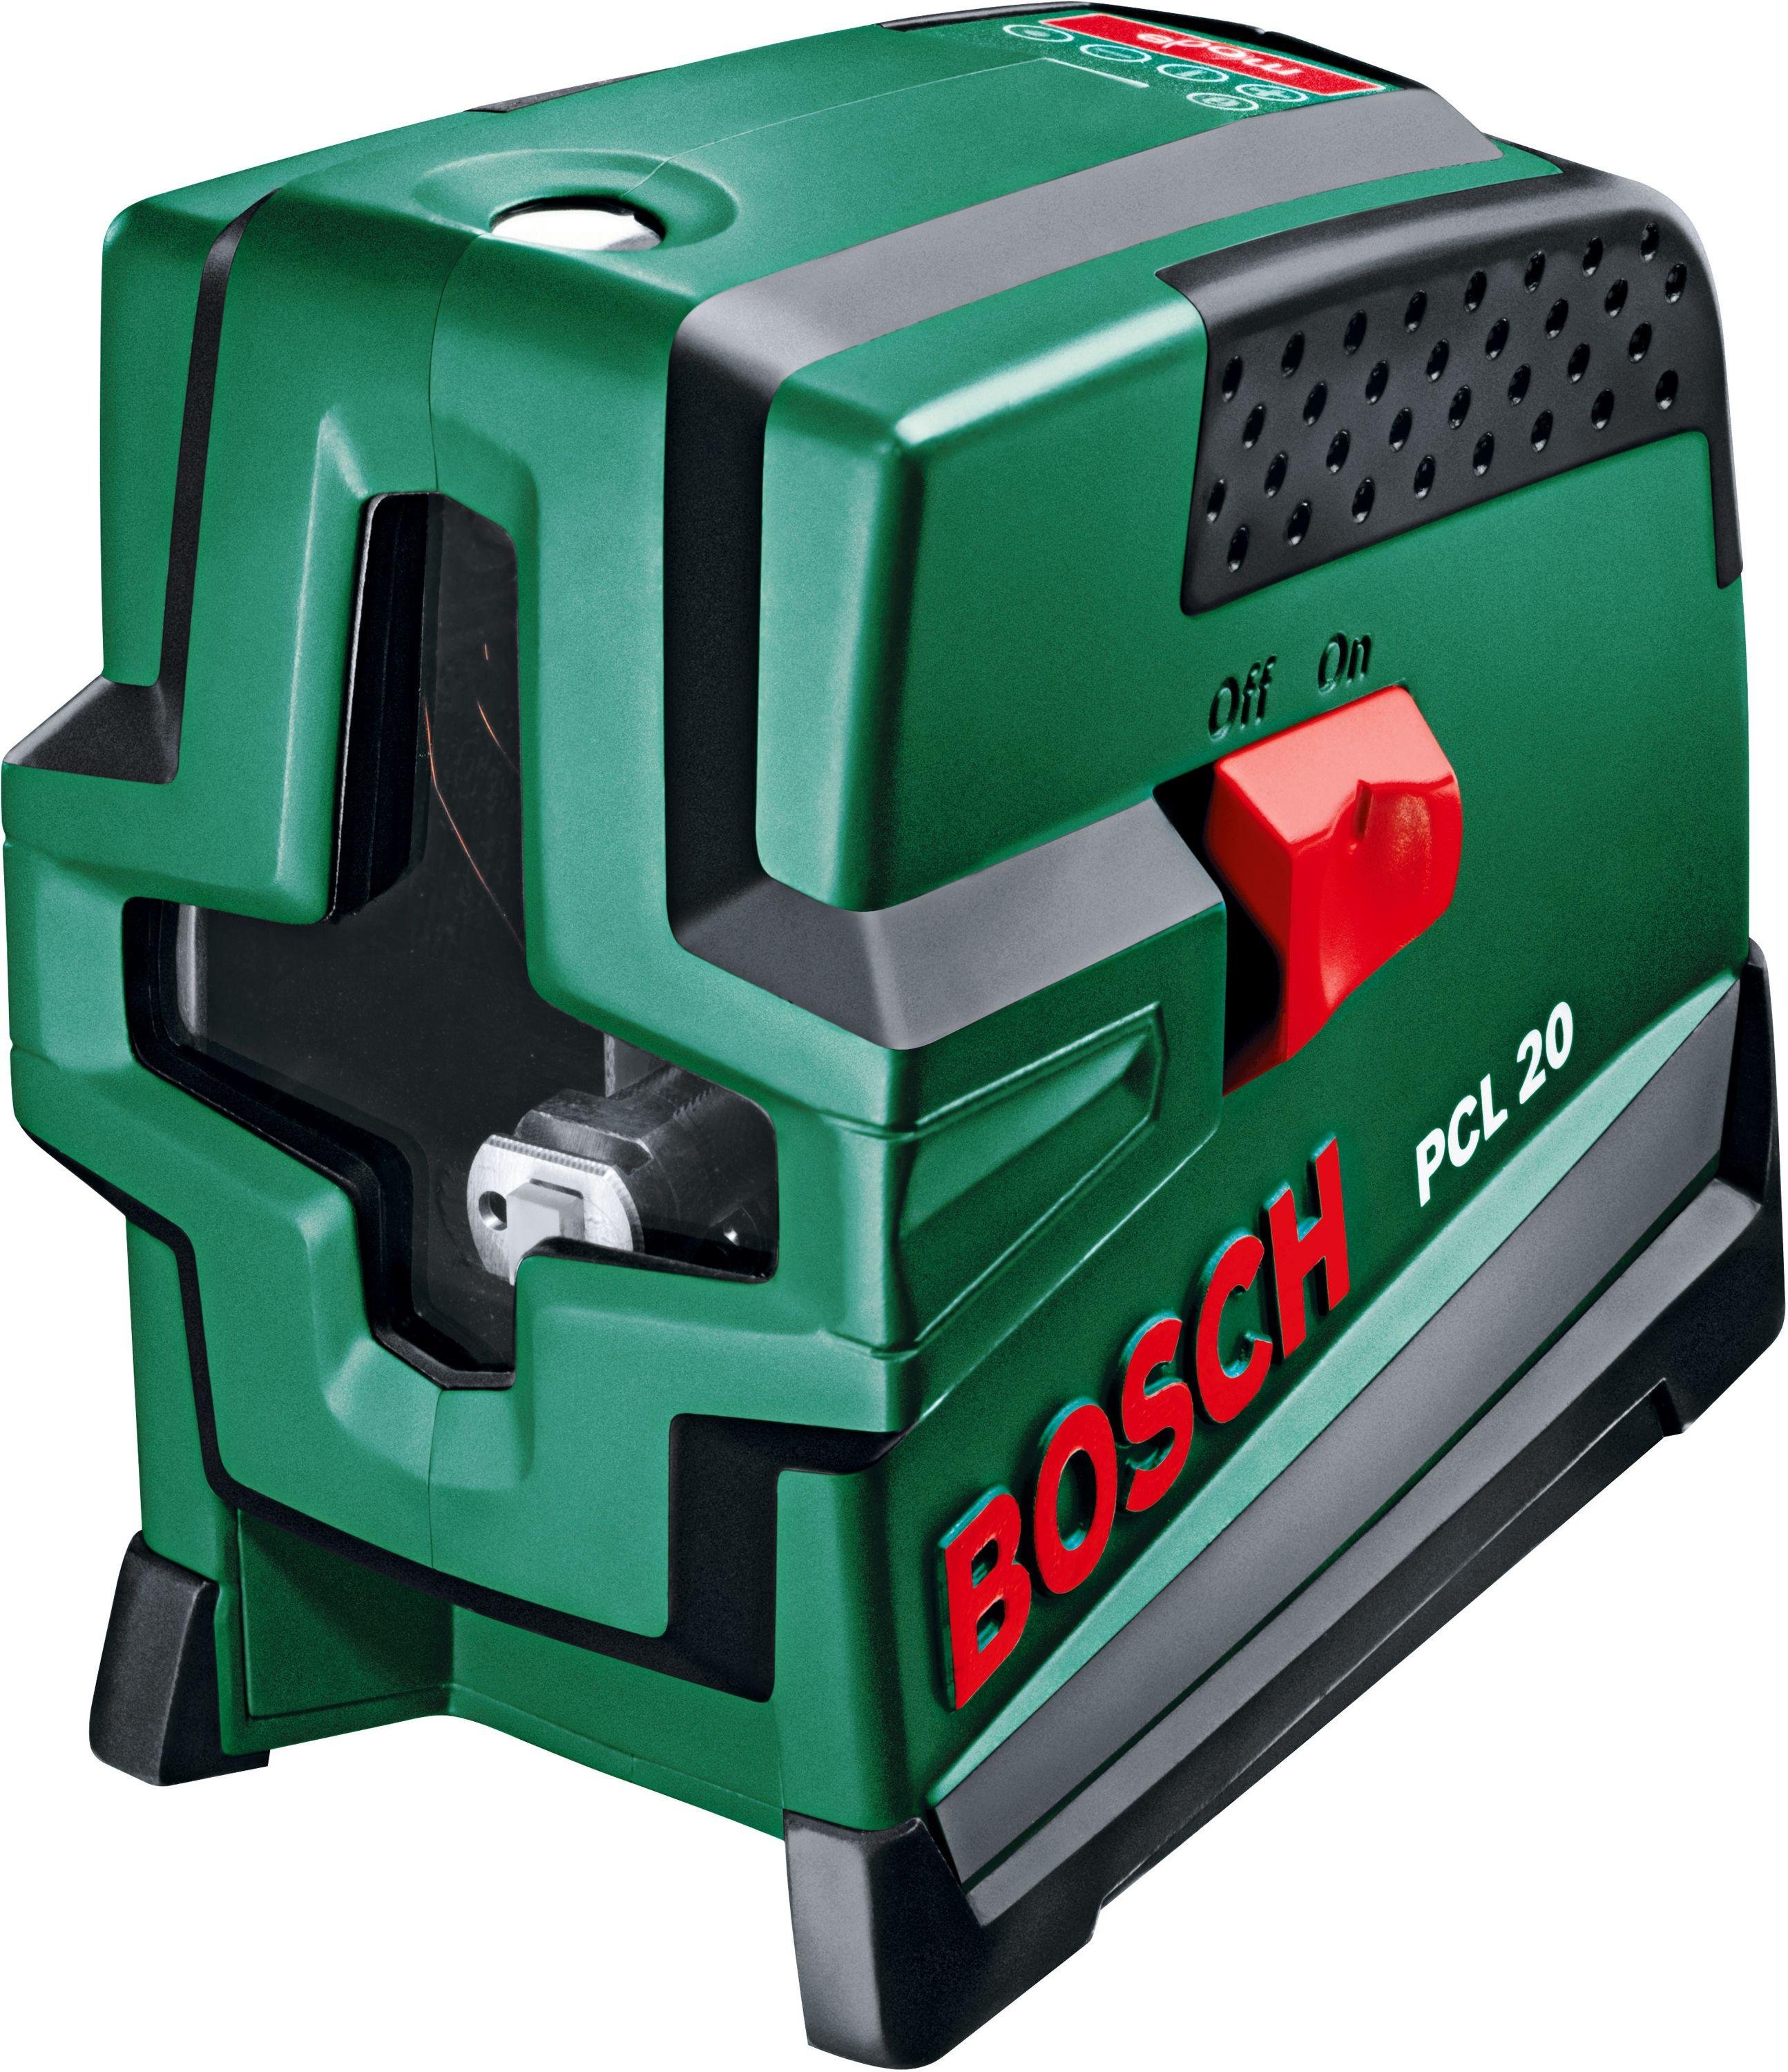 Bosch PCL 20 Set Laser Level with Tripod